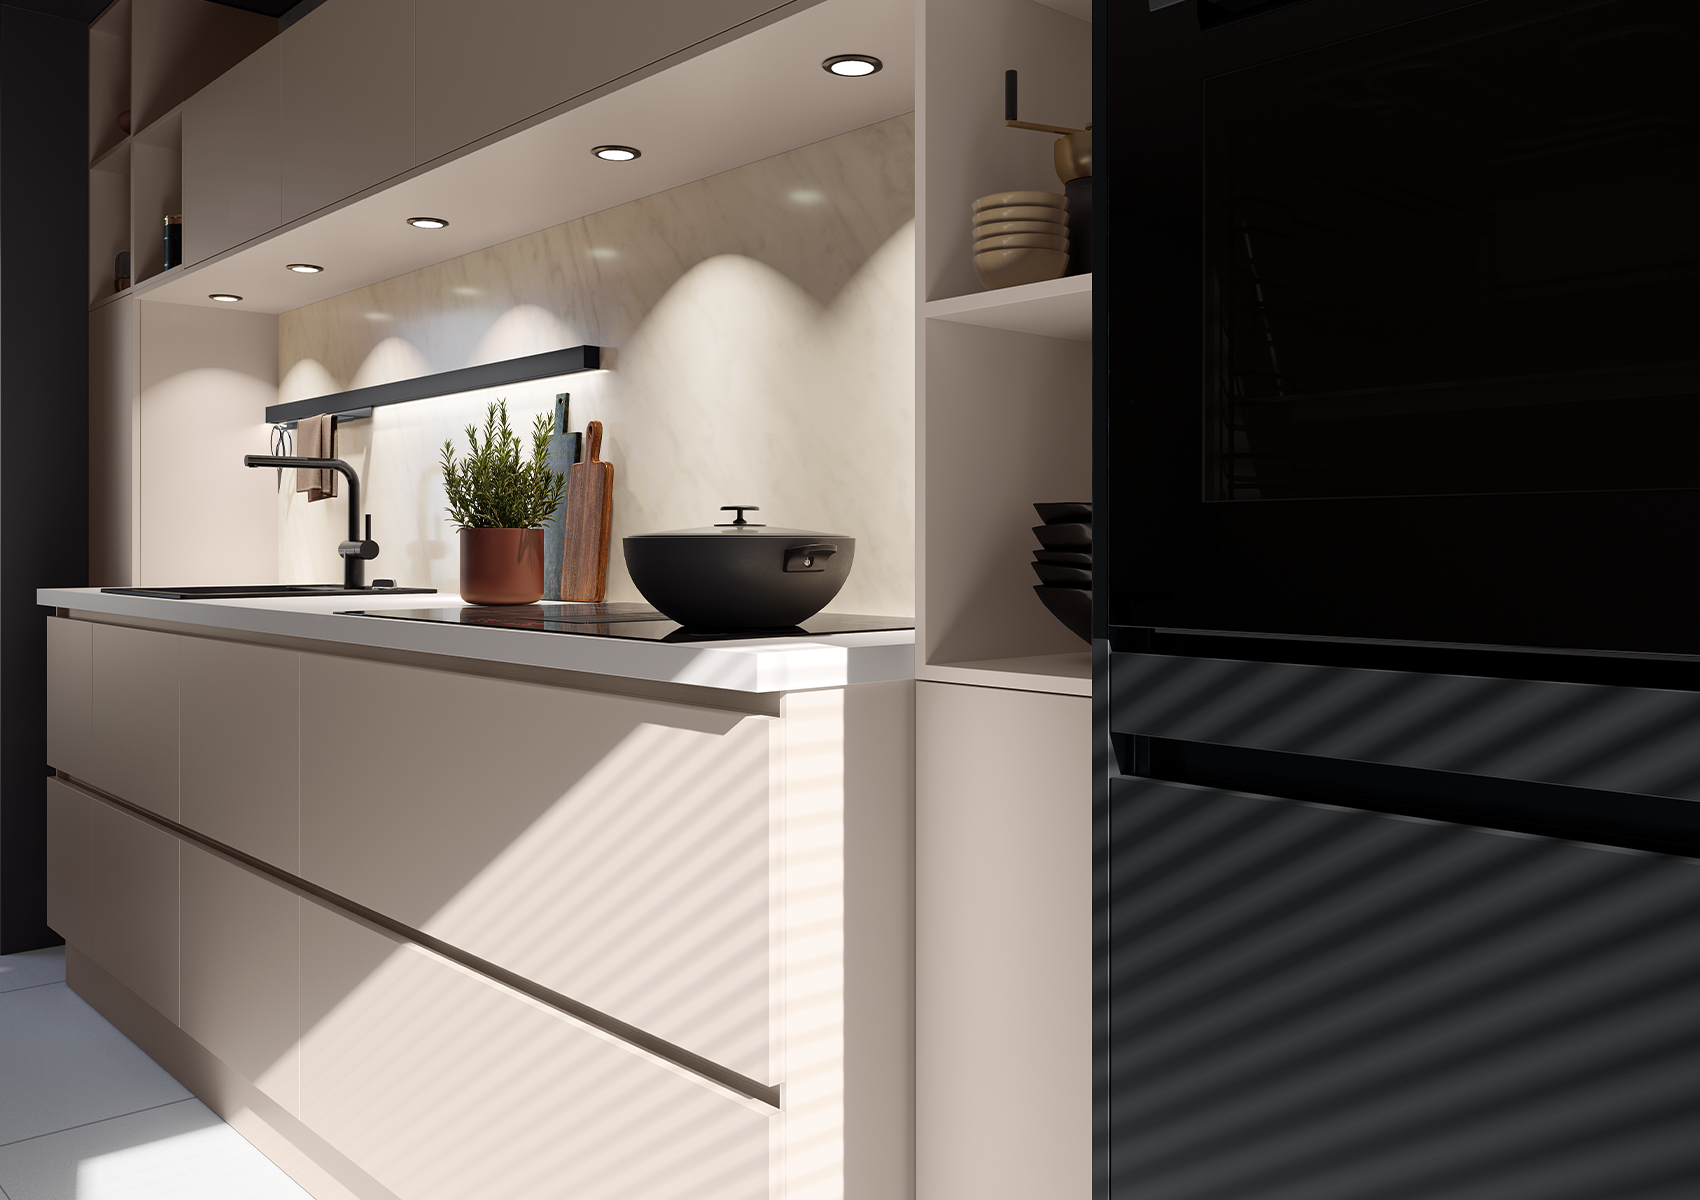 View of the kitchen unit with worktop and marbled kitchen back panel, illuminated with spotlights and LED strips integrated into the wall units, fitted with Linero MosaiQ railing and double hooks.